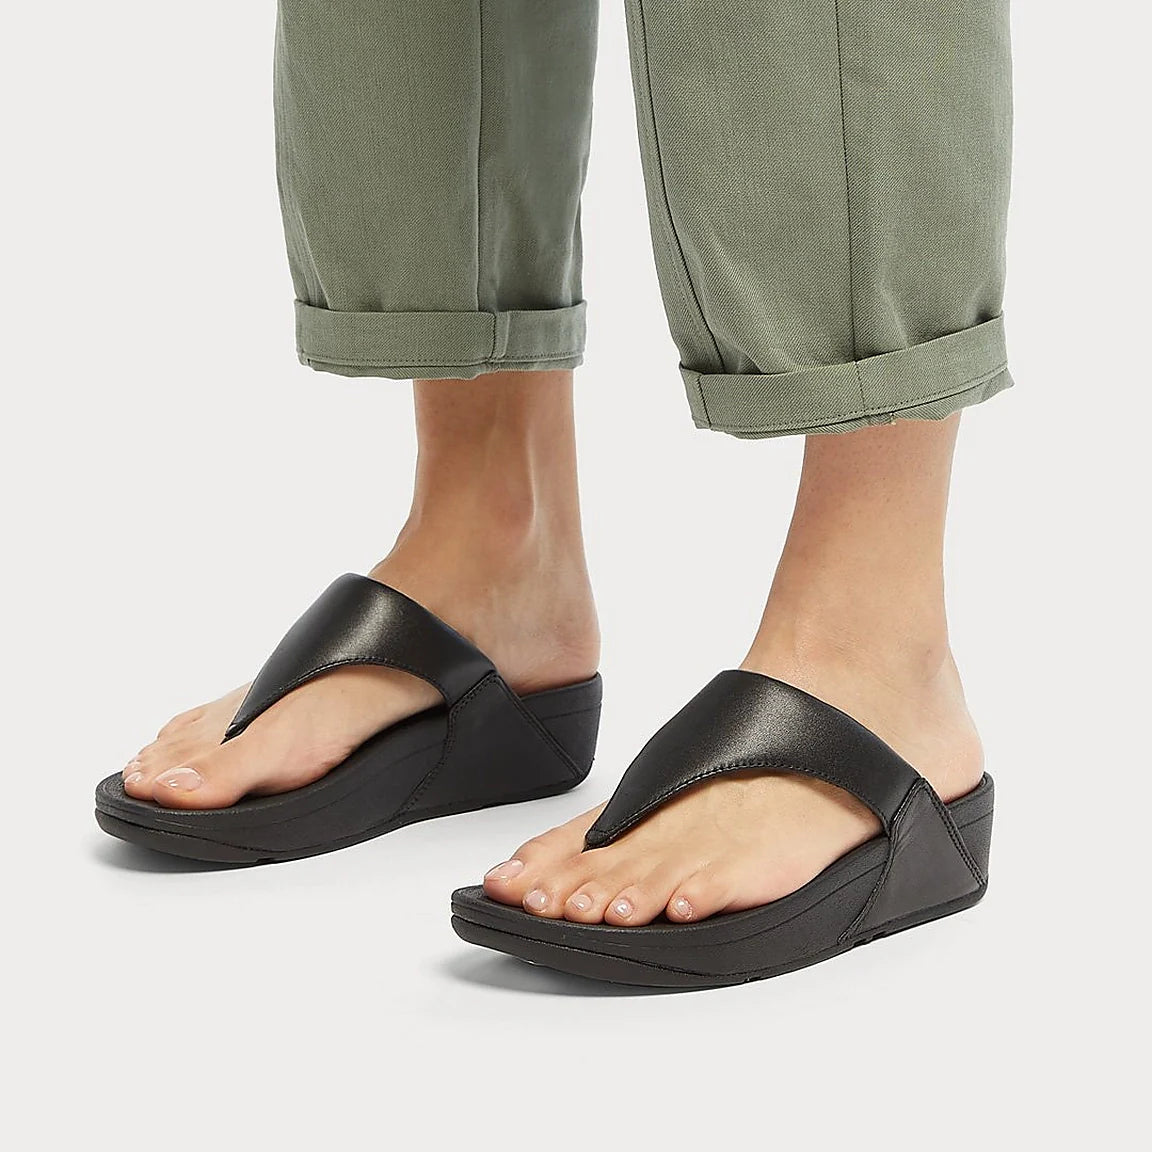 FitFlop FitFlop LULU Leather Toe-Post Sandals    